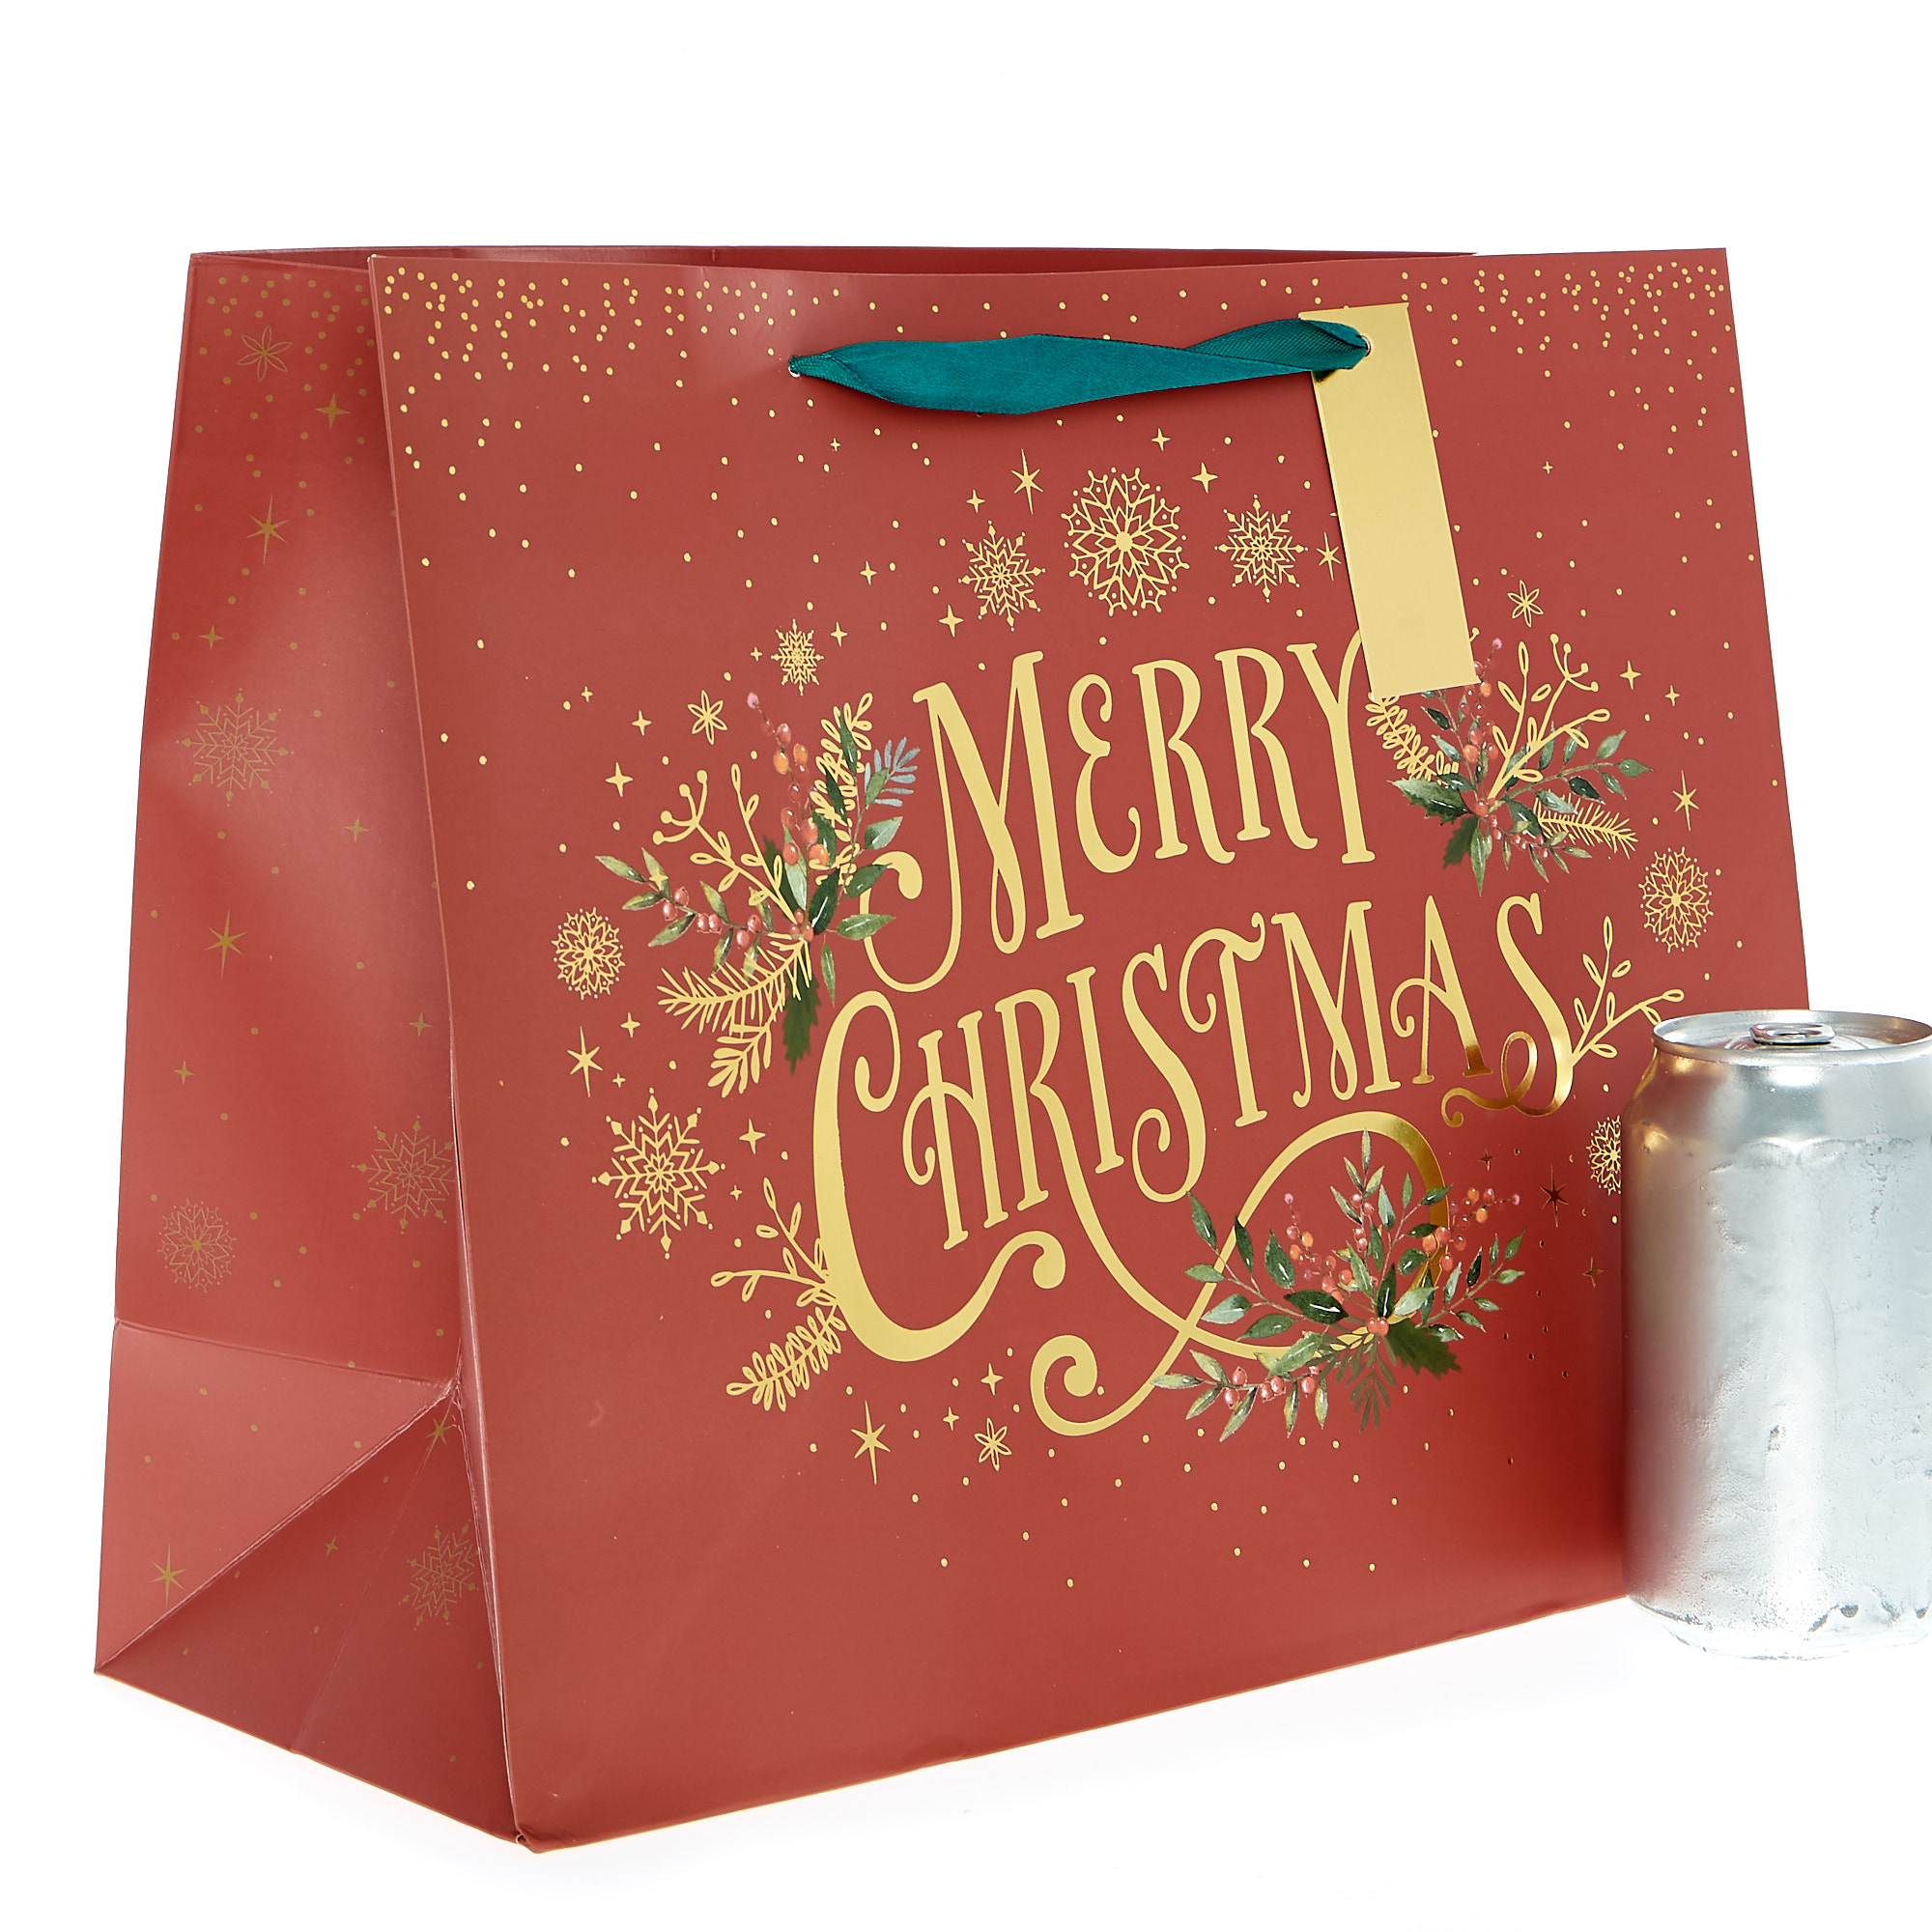 Best Christmas Ever Personalized Goodie Bags